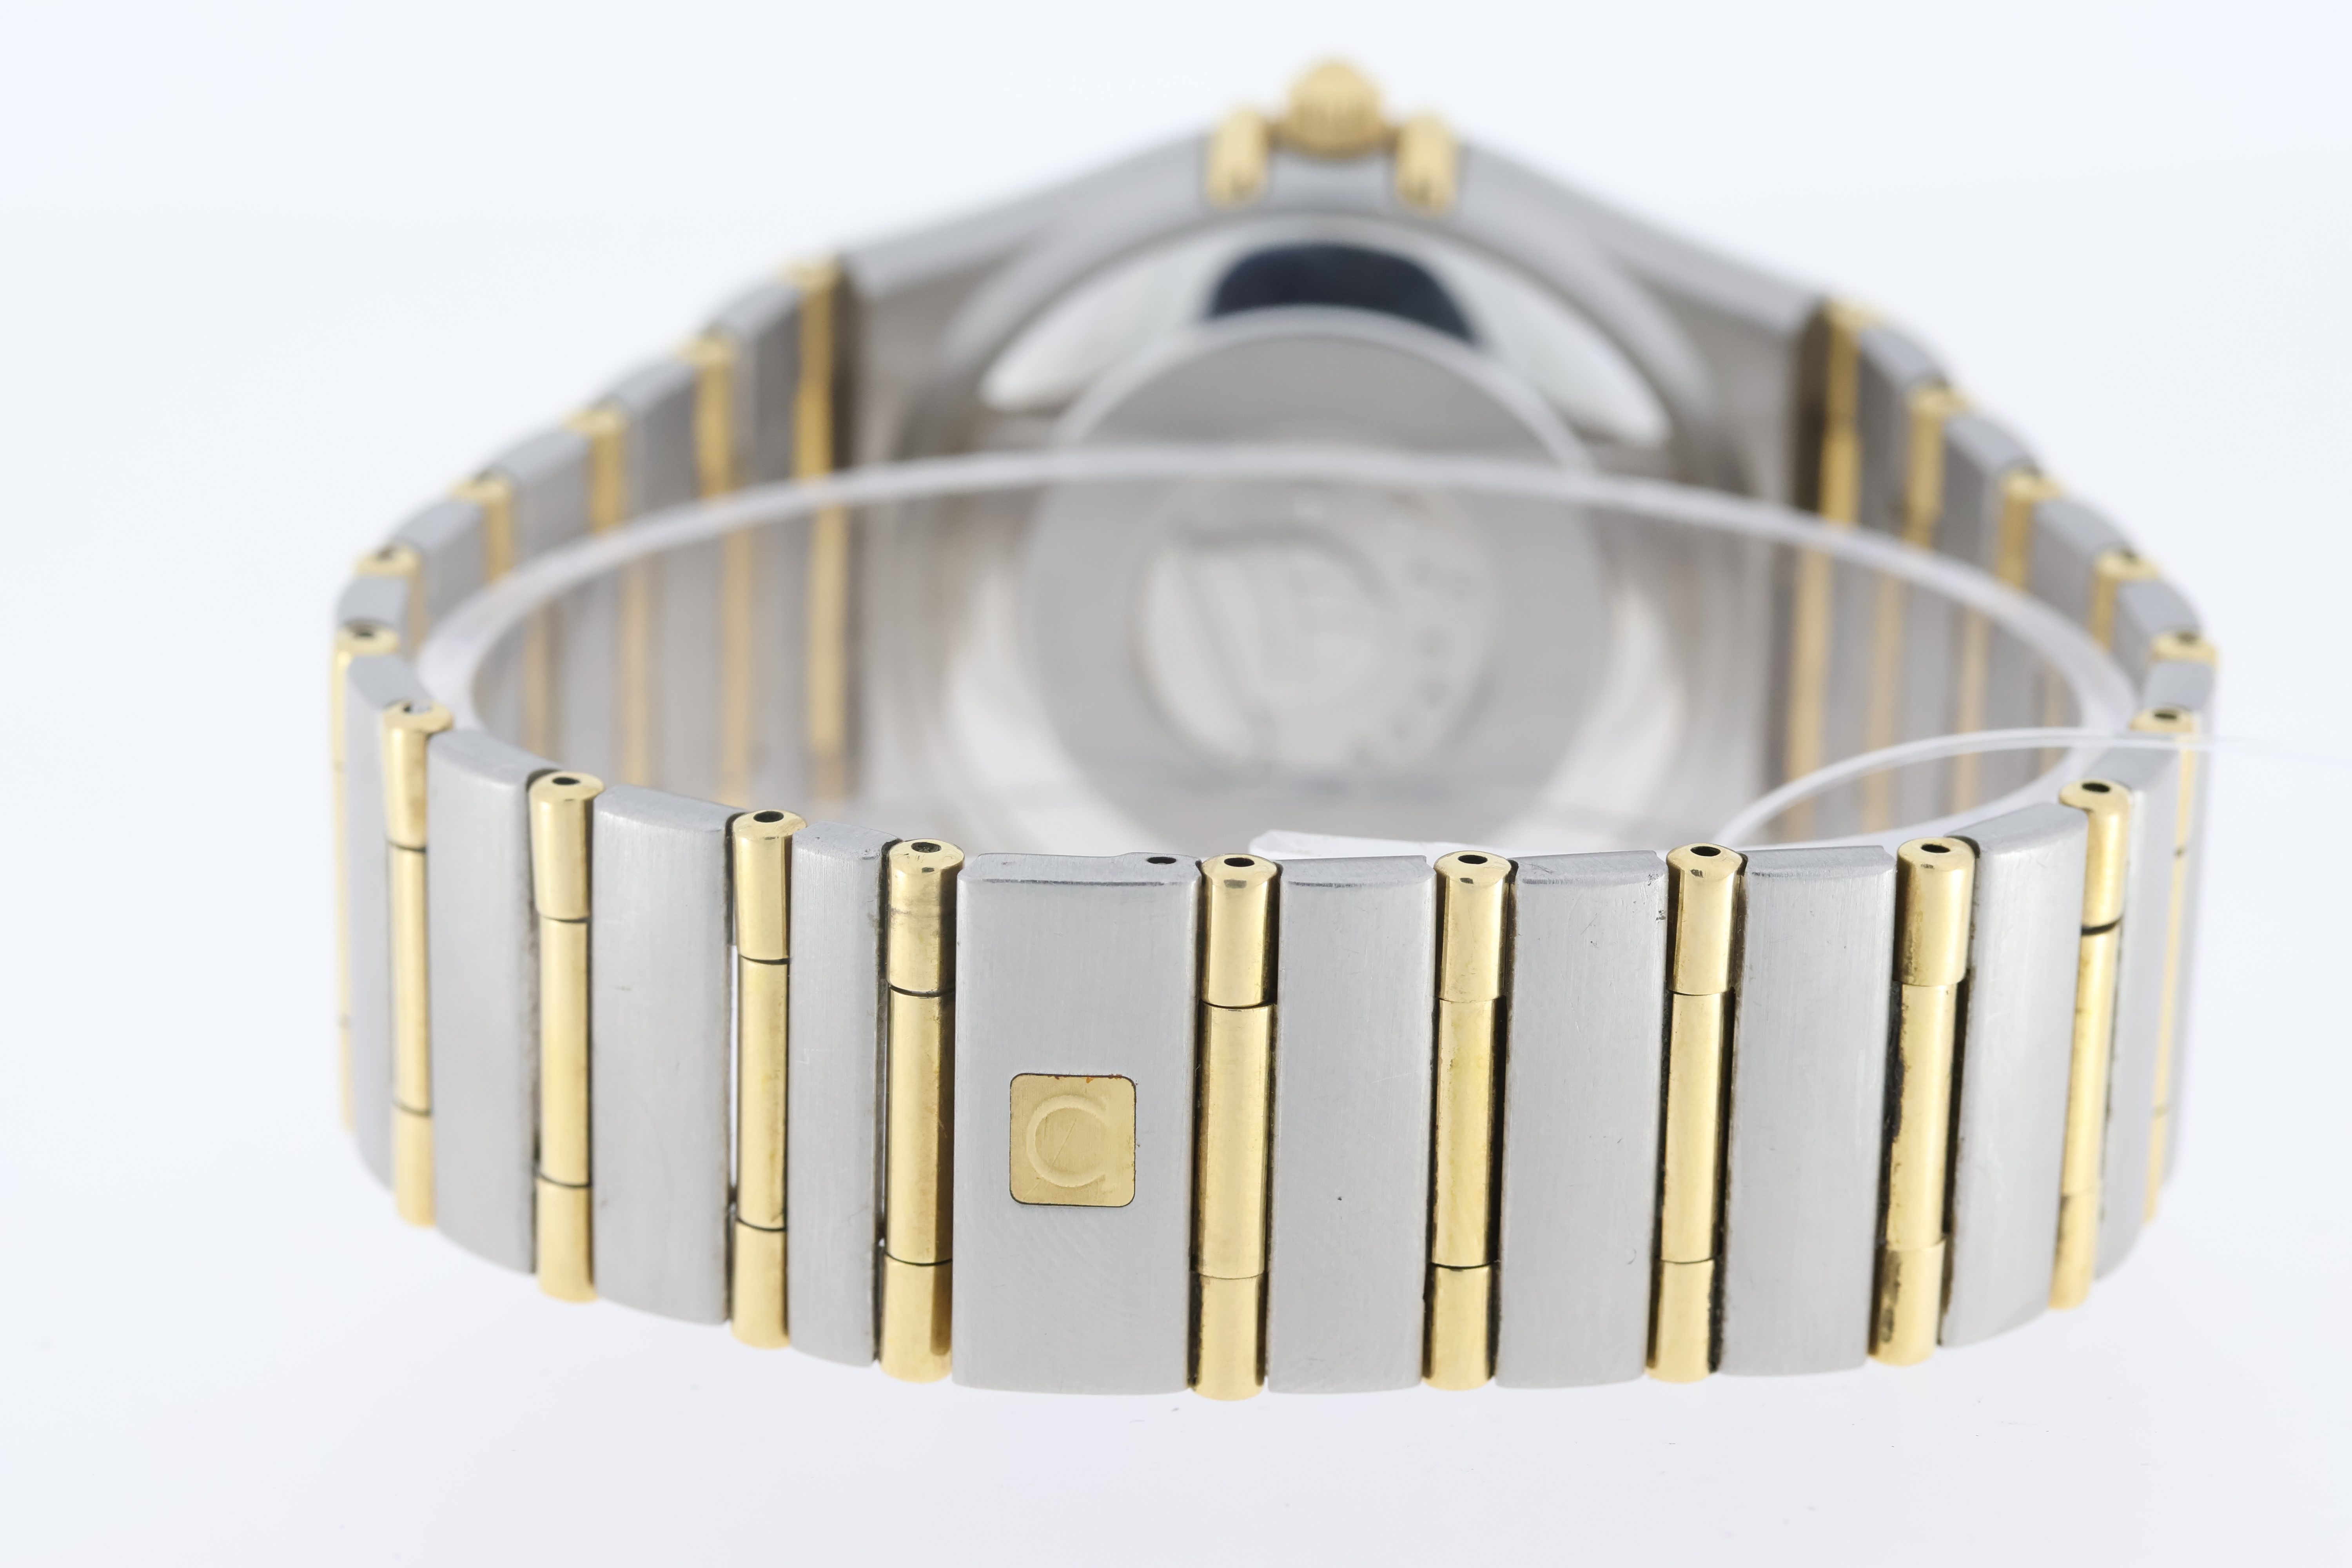 Omega Constellation Reference 368.1201 Circa 2000 - Image 3 of 4